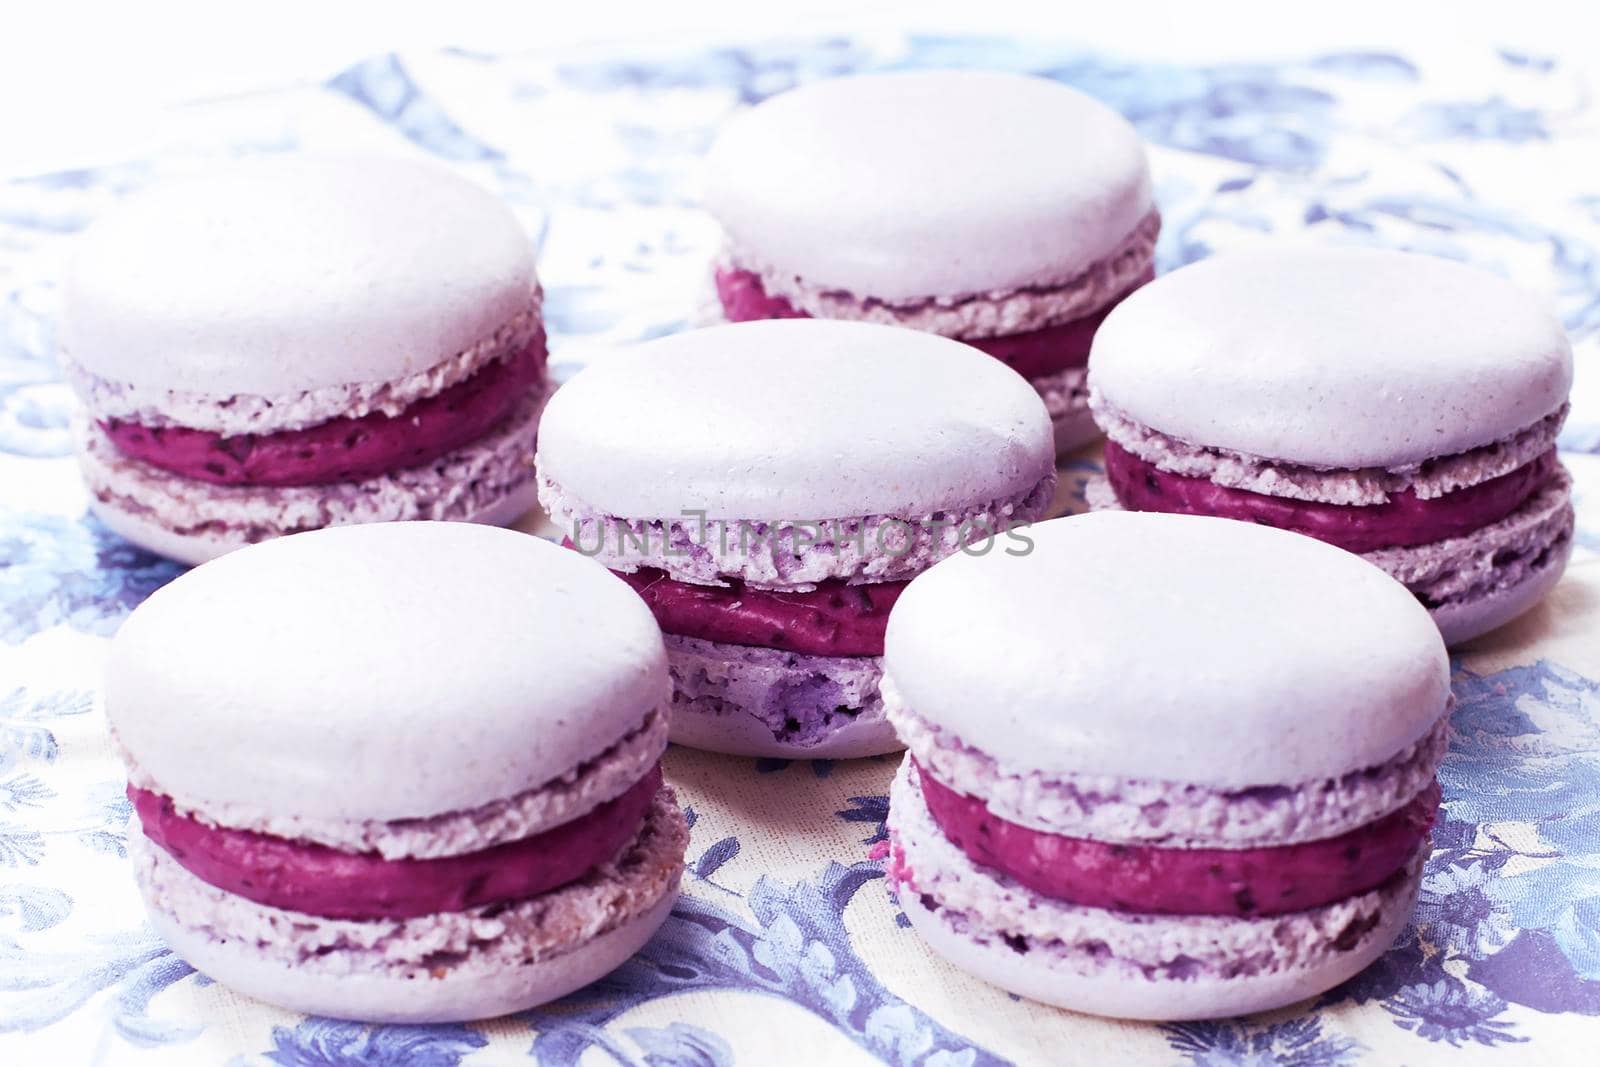 French Macarons with cranberries on blue napkin - Stock image